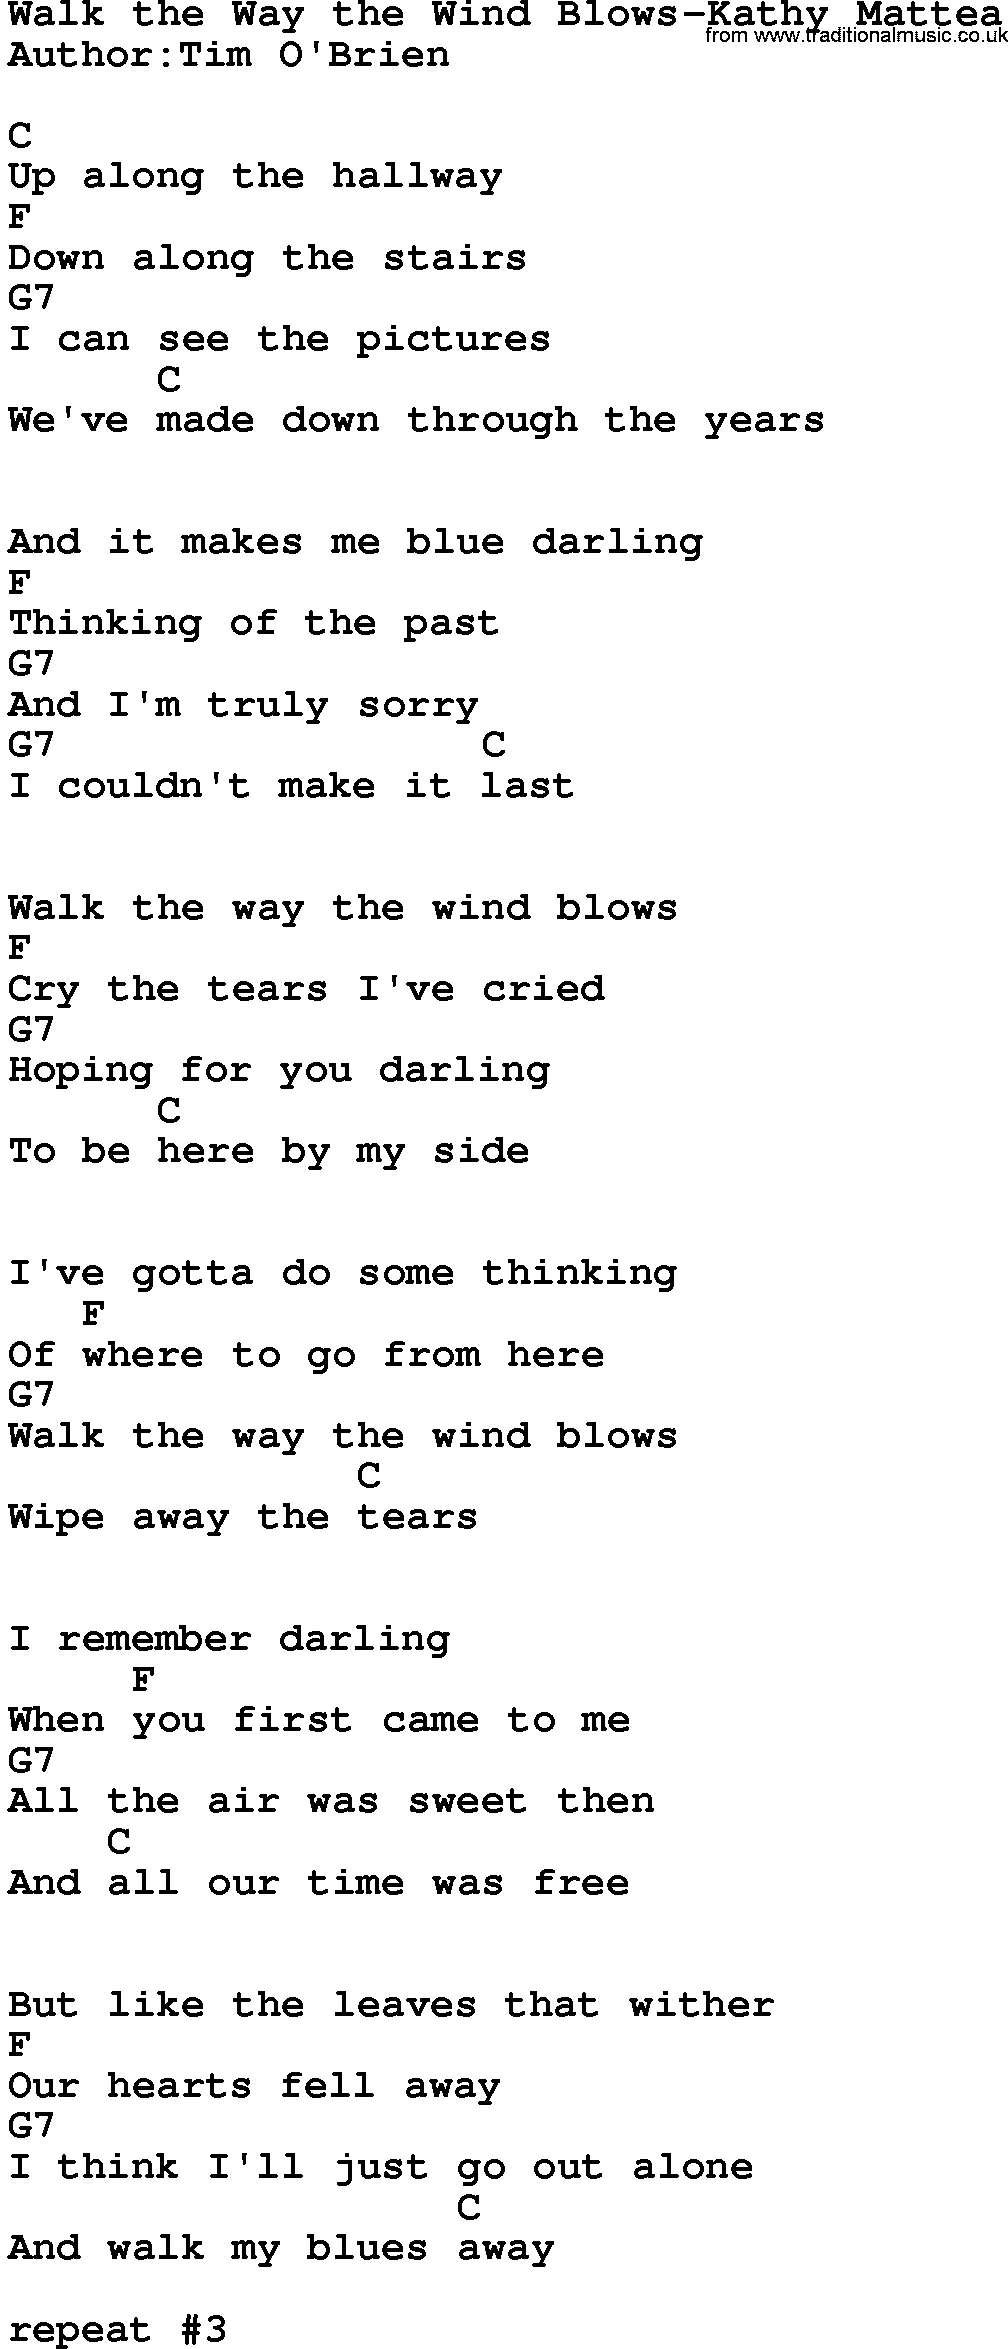 Country music song: Walk The Way The Wind Blows-Kathy Mattea lyrics and chords